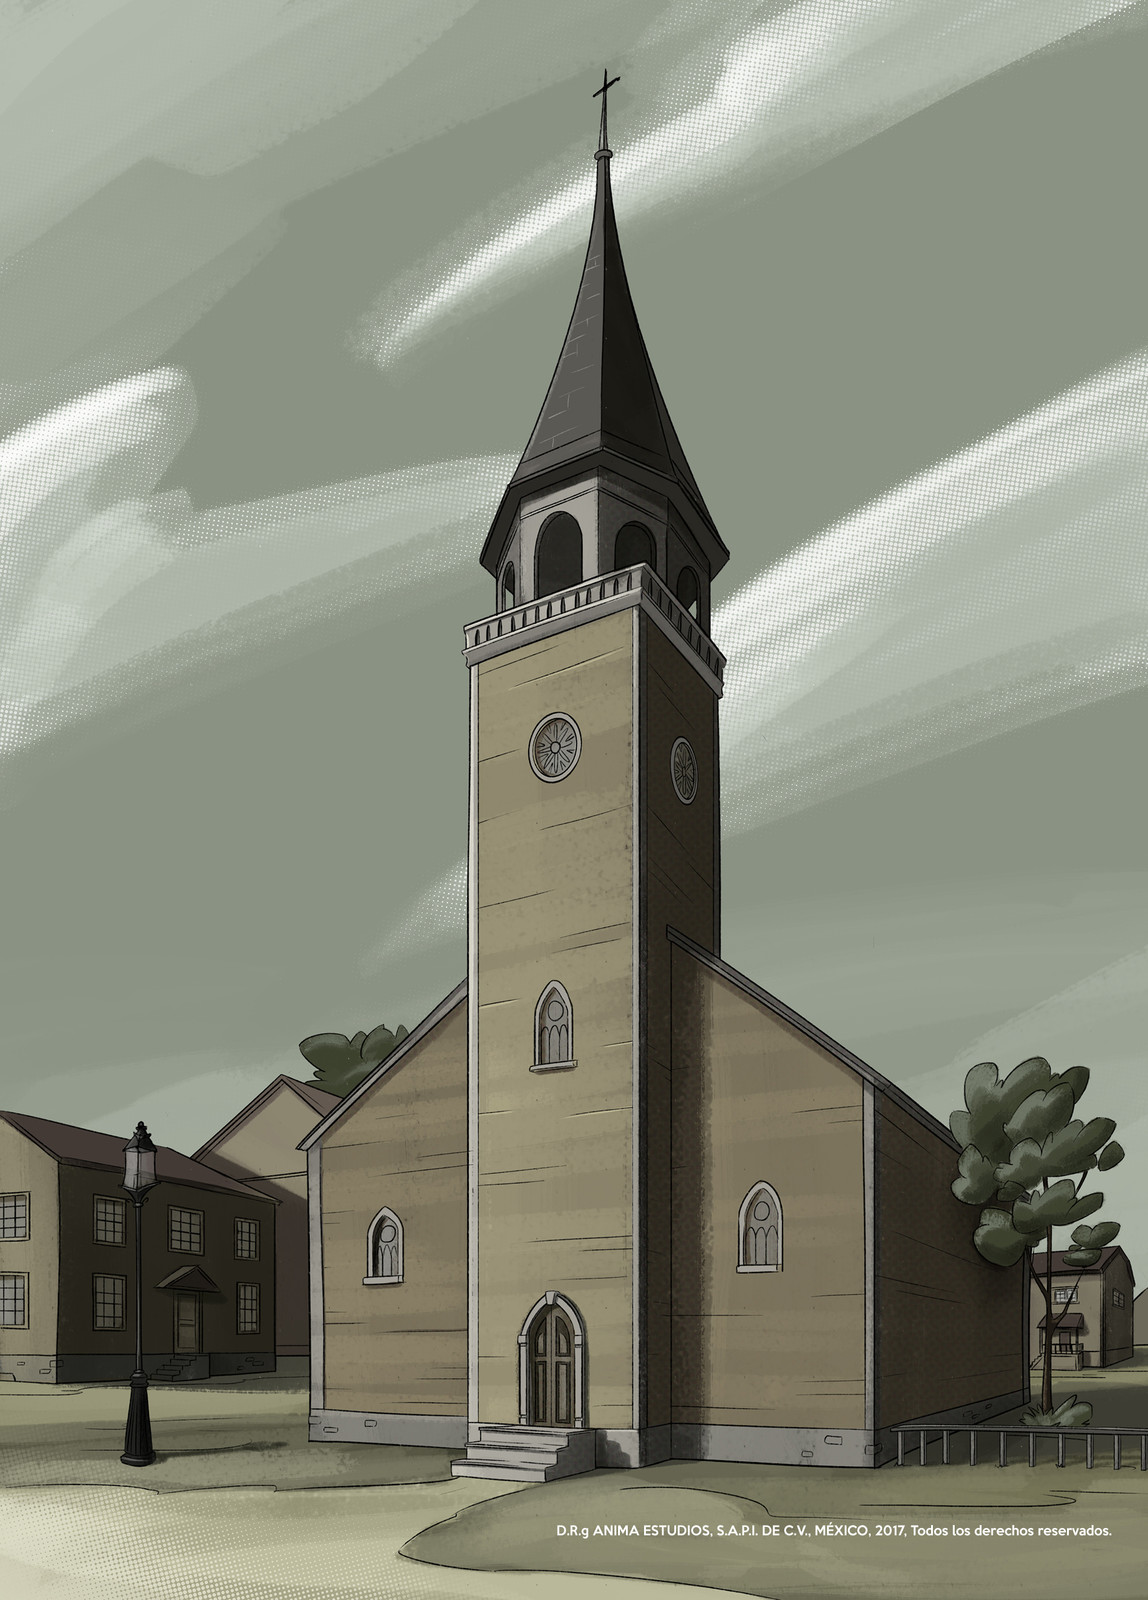 Concept art for the church.